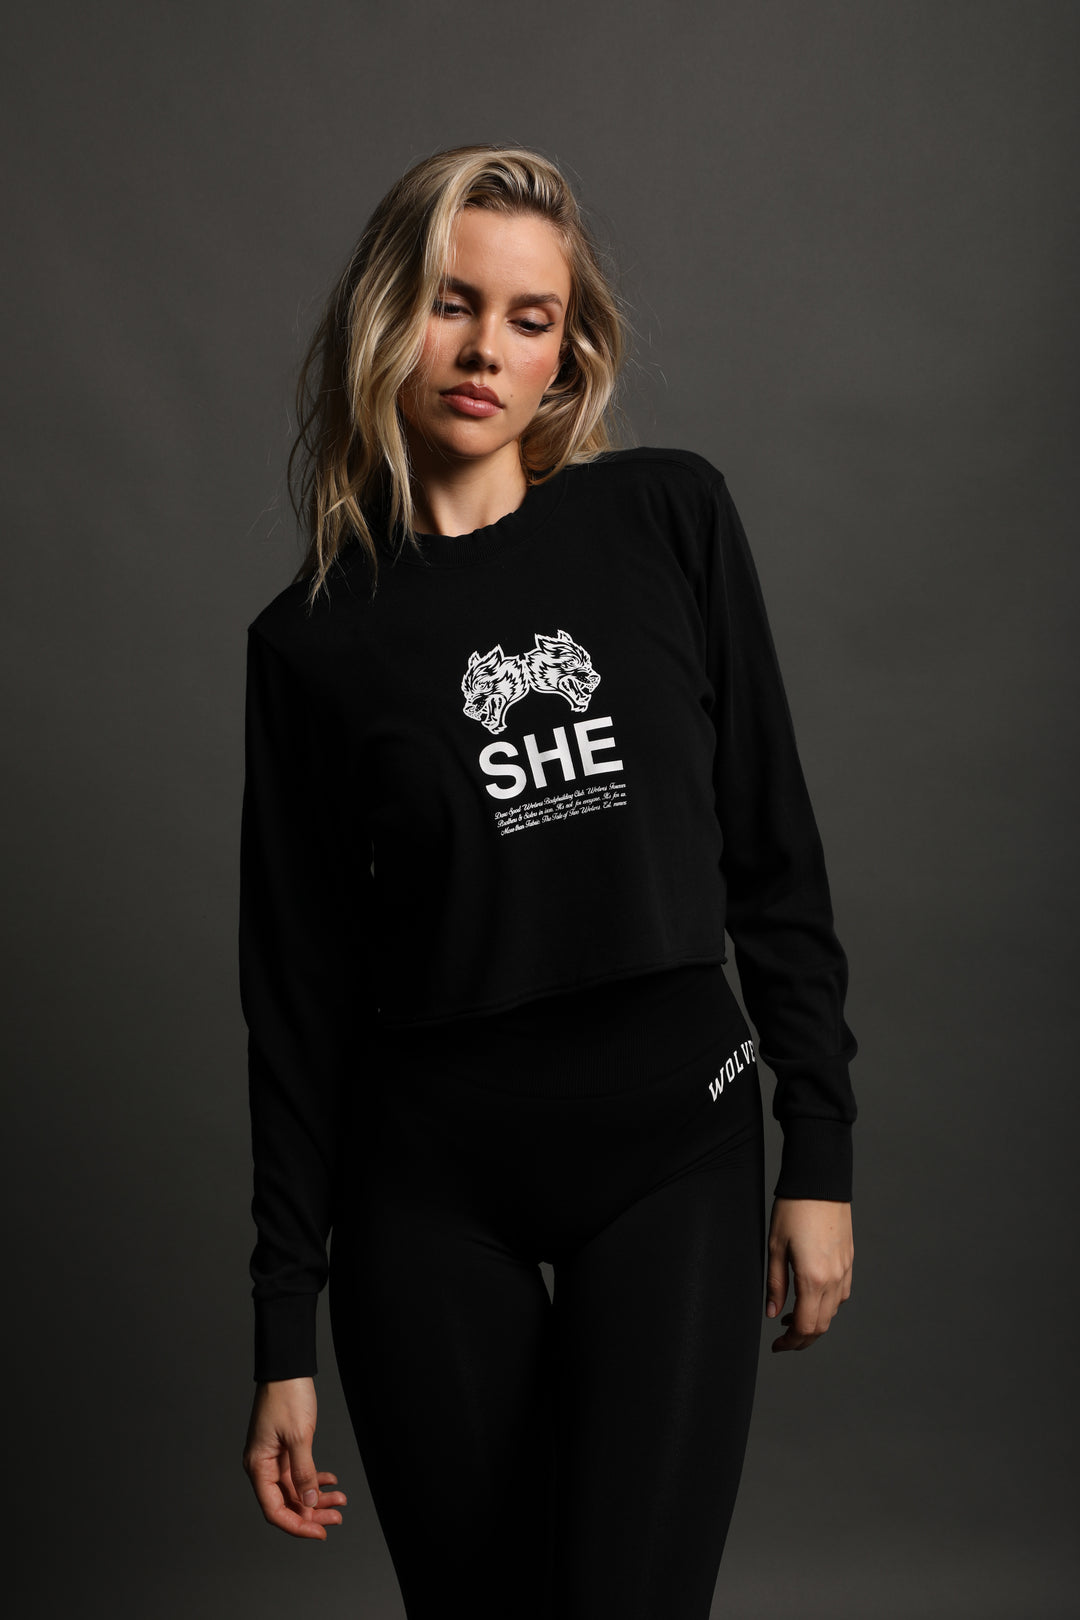 She's Gritty "Premium" (Cropped) (LS) Tee in Black